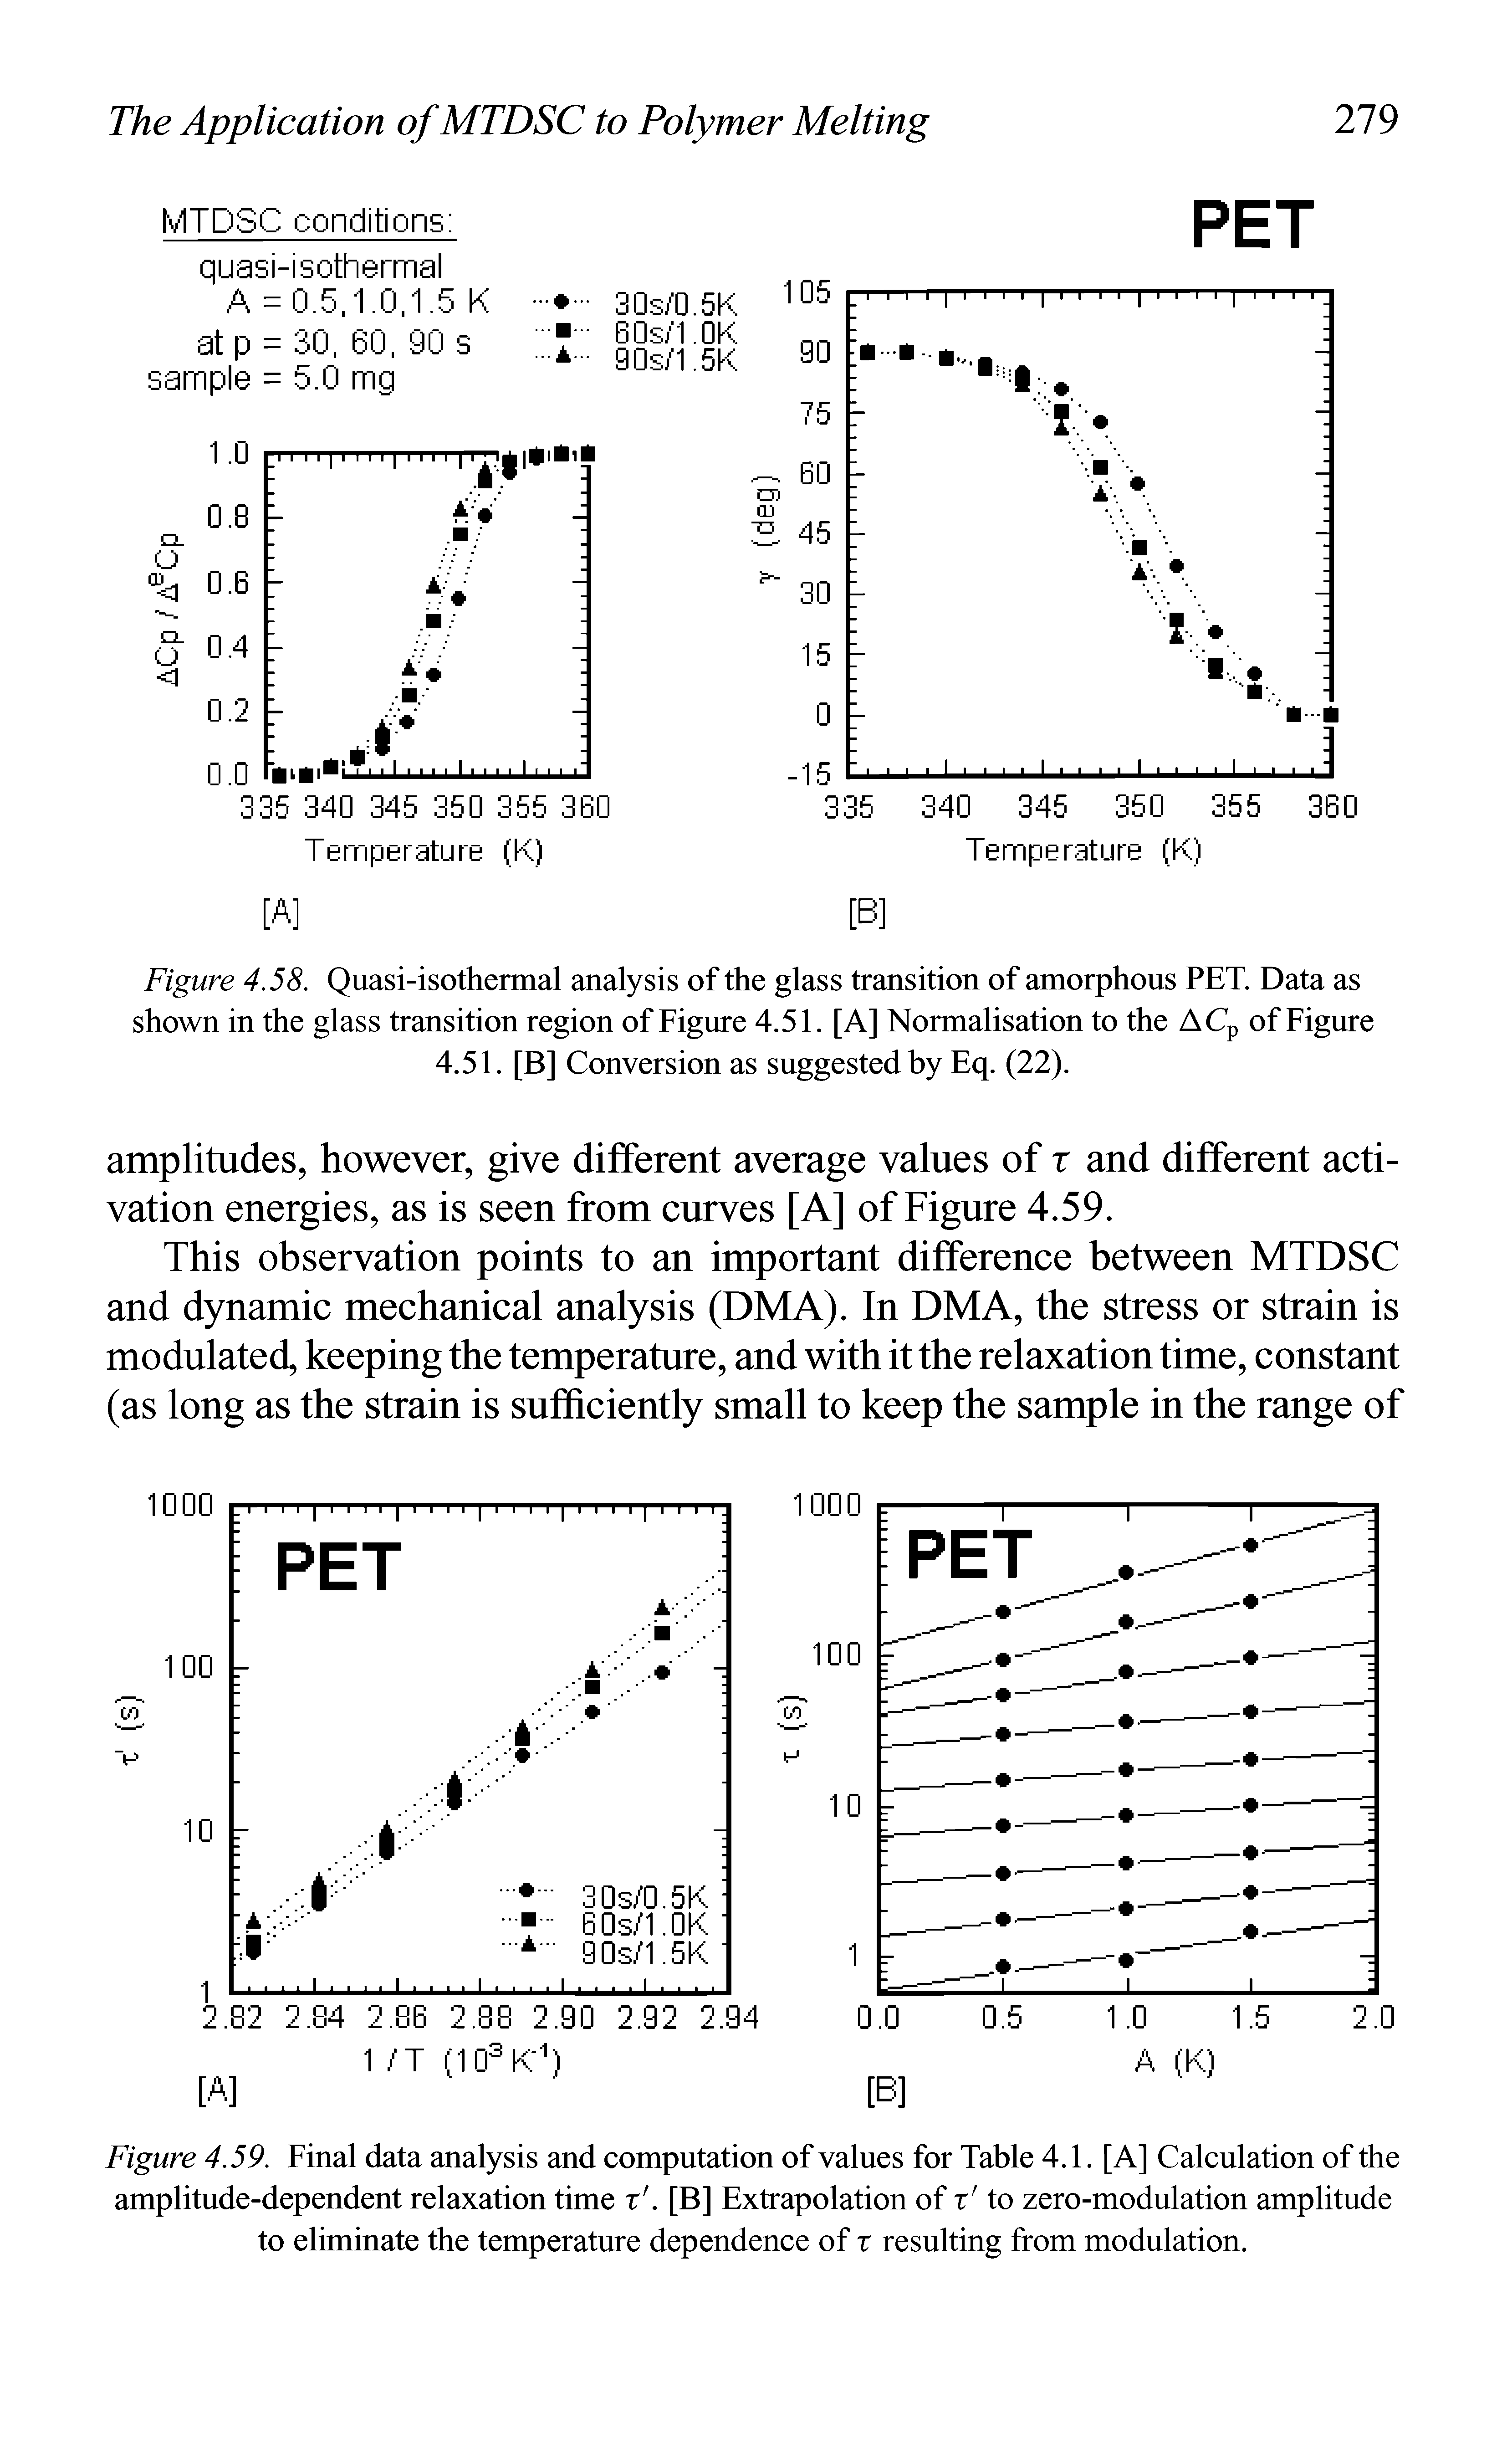 Figure 4.59. Final data analysis and computation of values for Table 4.1. [A] Calculation of the amplitude-dependent relaxation time x. [B] Extrapolation of x to zero-modulation amplitude to eliminate the temperature dependence of r resulting from modulation.